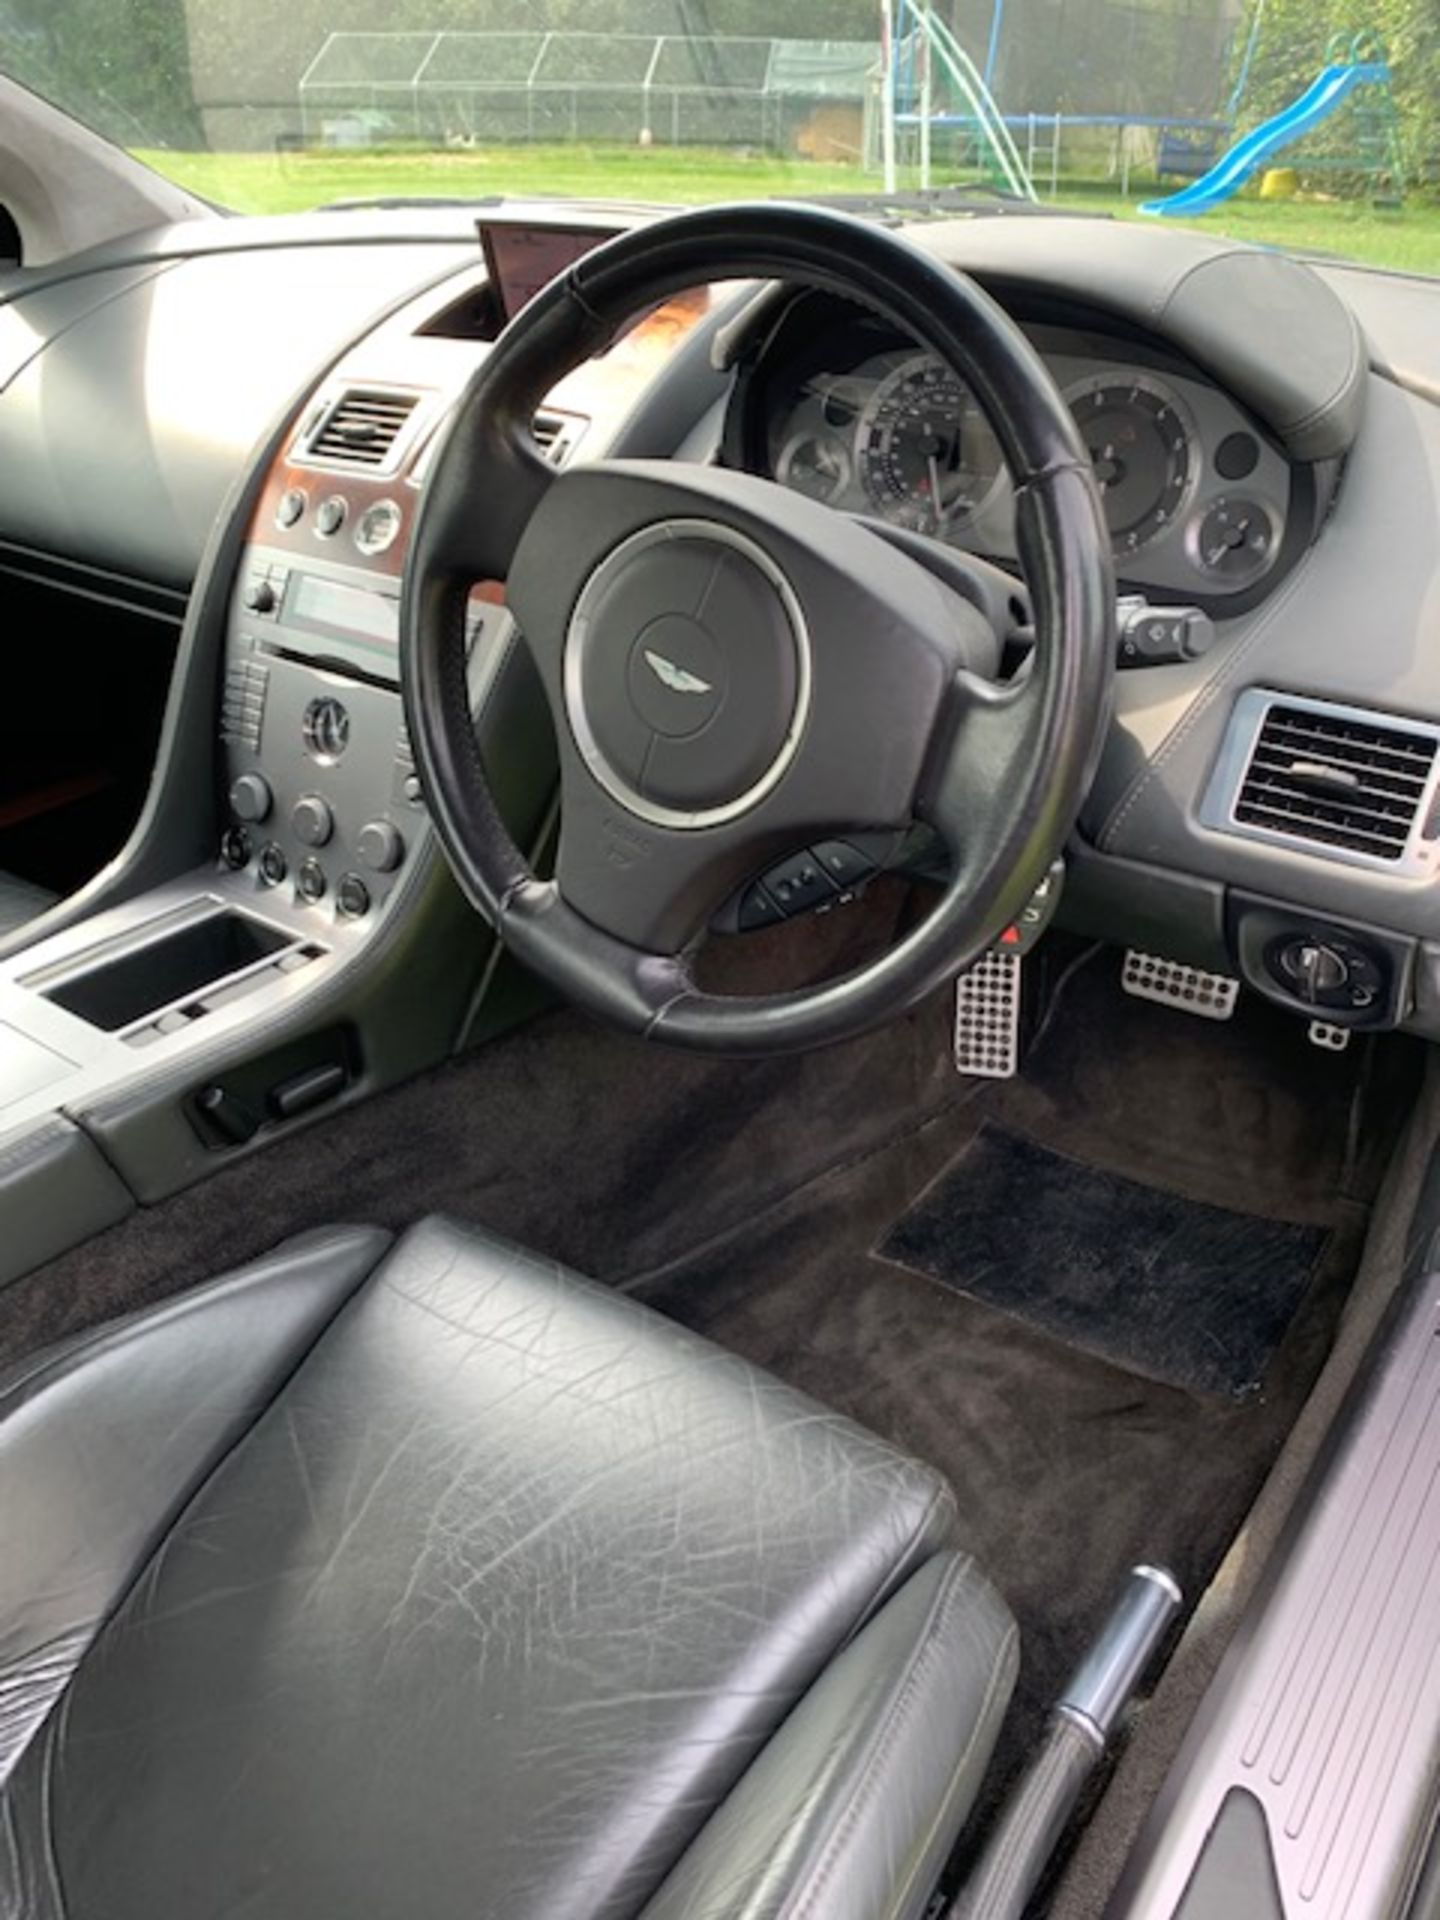 ASTON MARTIN DB9 COUPE V12 2DR TOUCHTRONIC AUTO (5935 cc) - Image 9 of 13